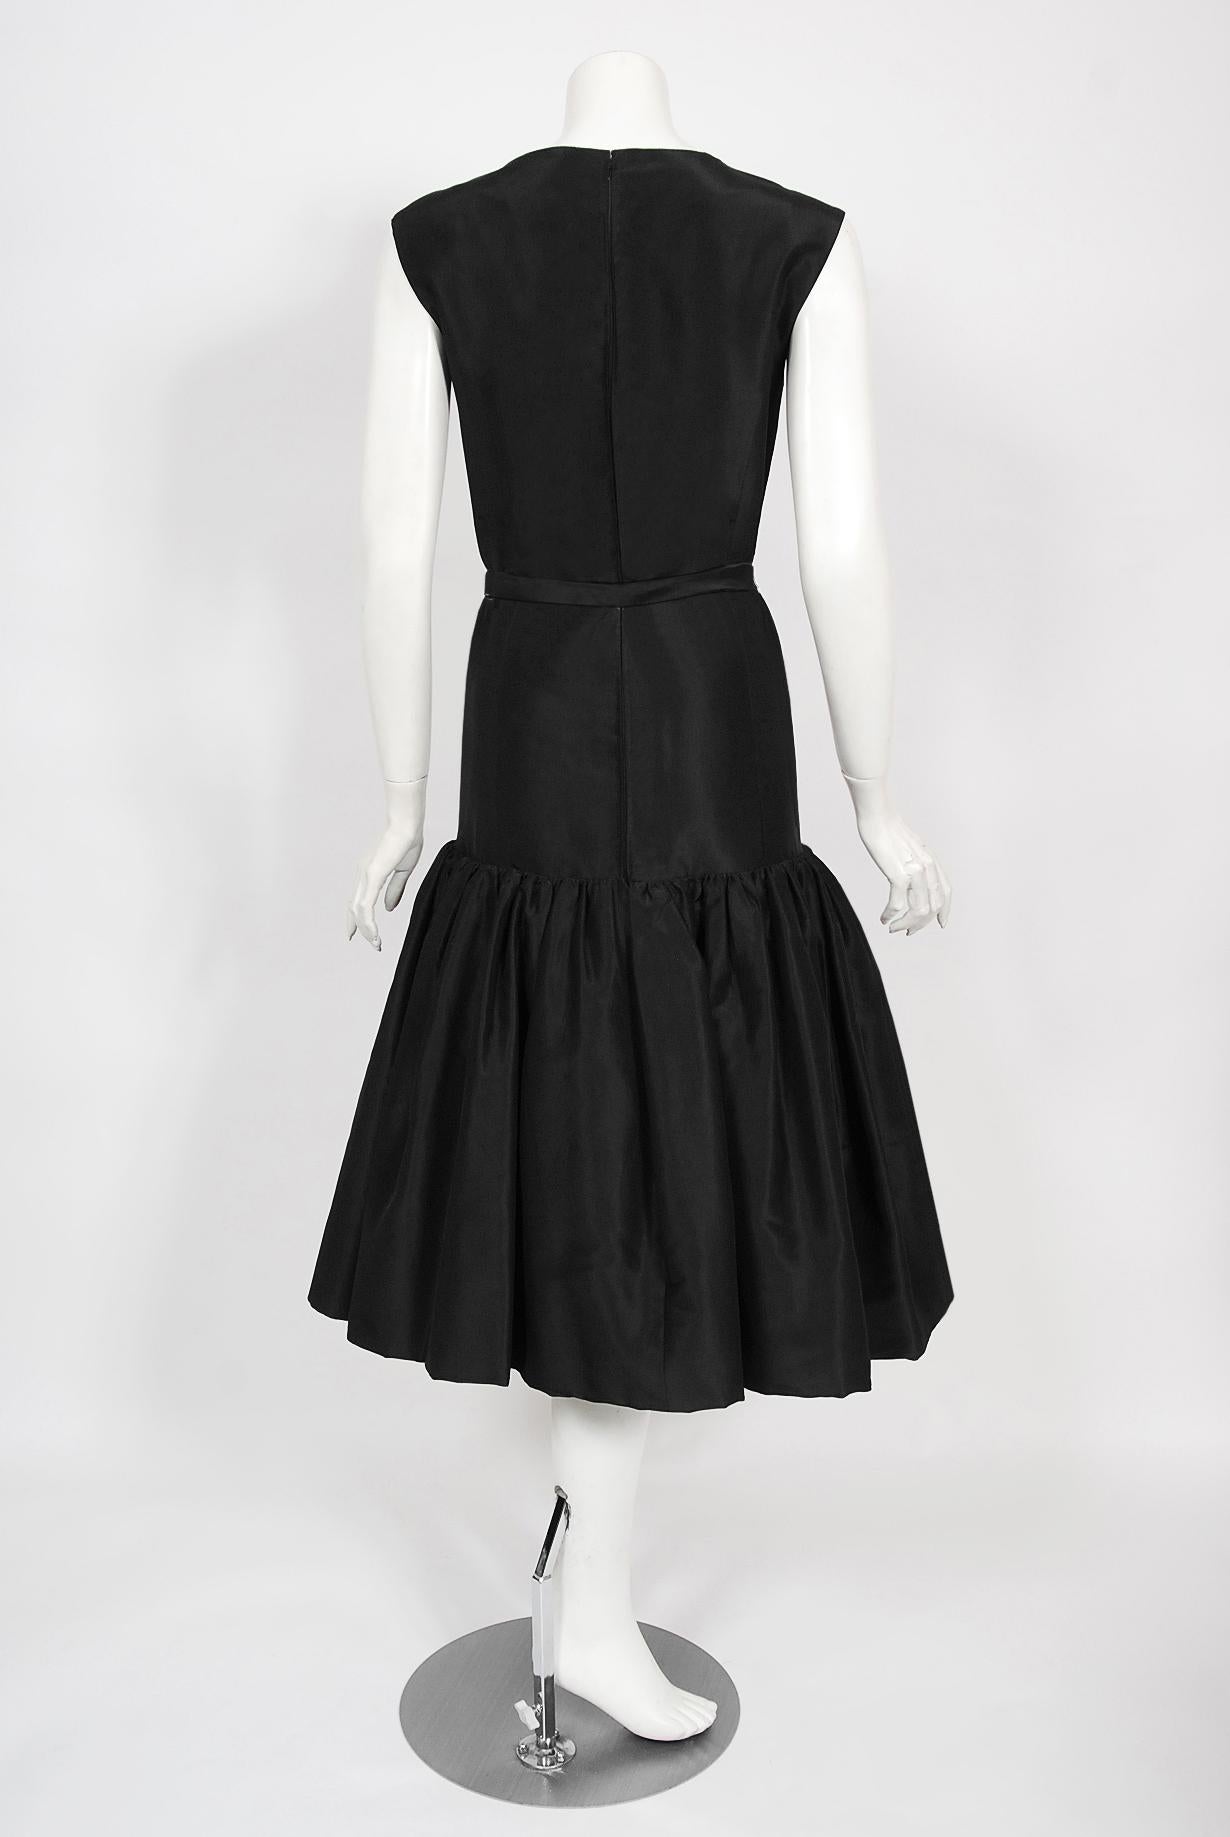 Vintage 1950's Traina-Norell Couture Black Silk Belted Flounce Cocktail Dress 7